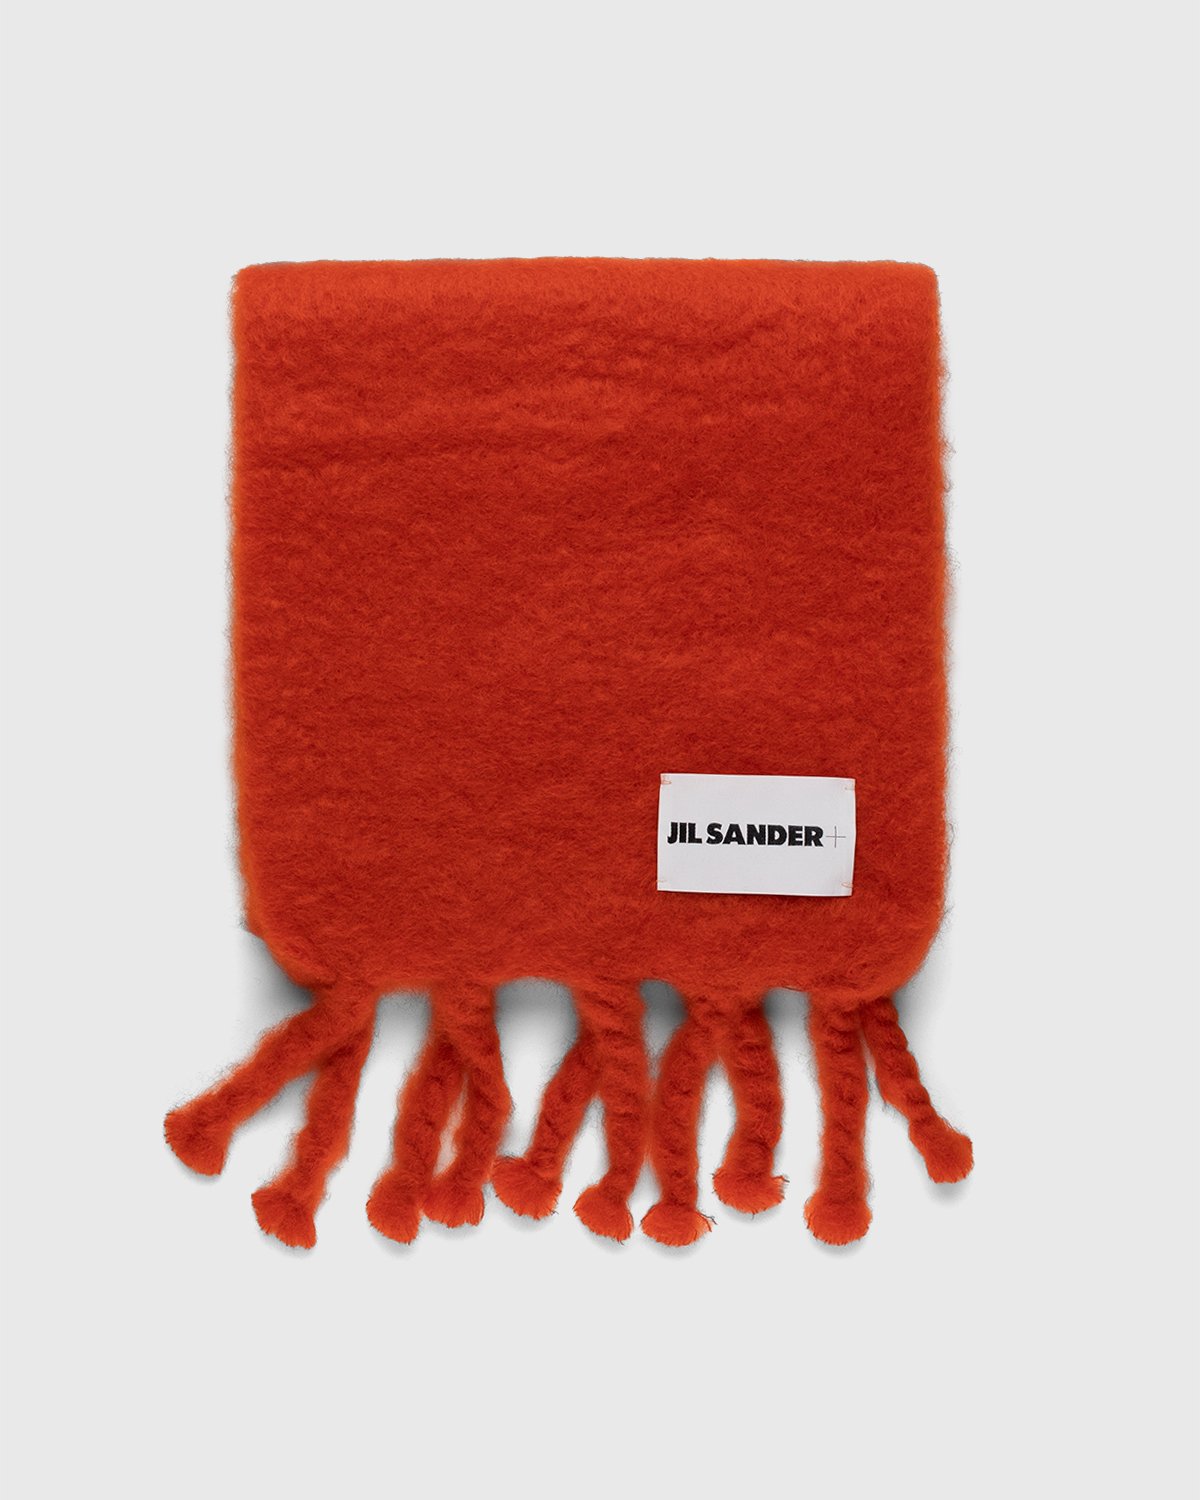 Jil Sander - Woven Scarf Red - Accessories - Red - Image 2